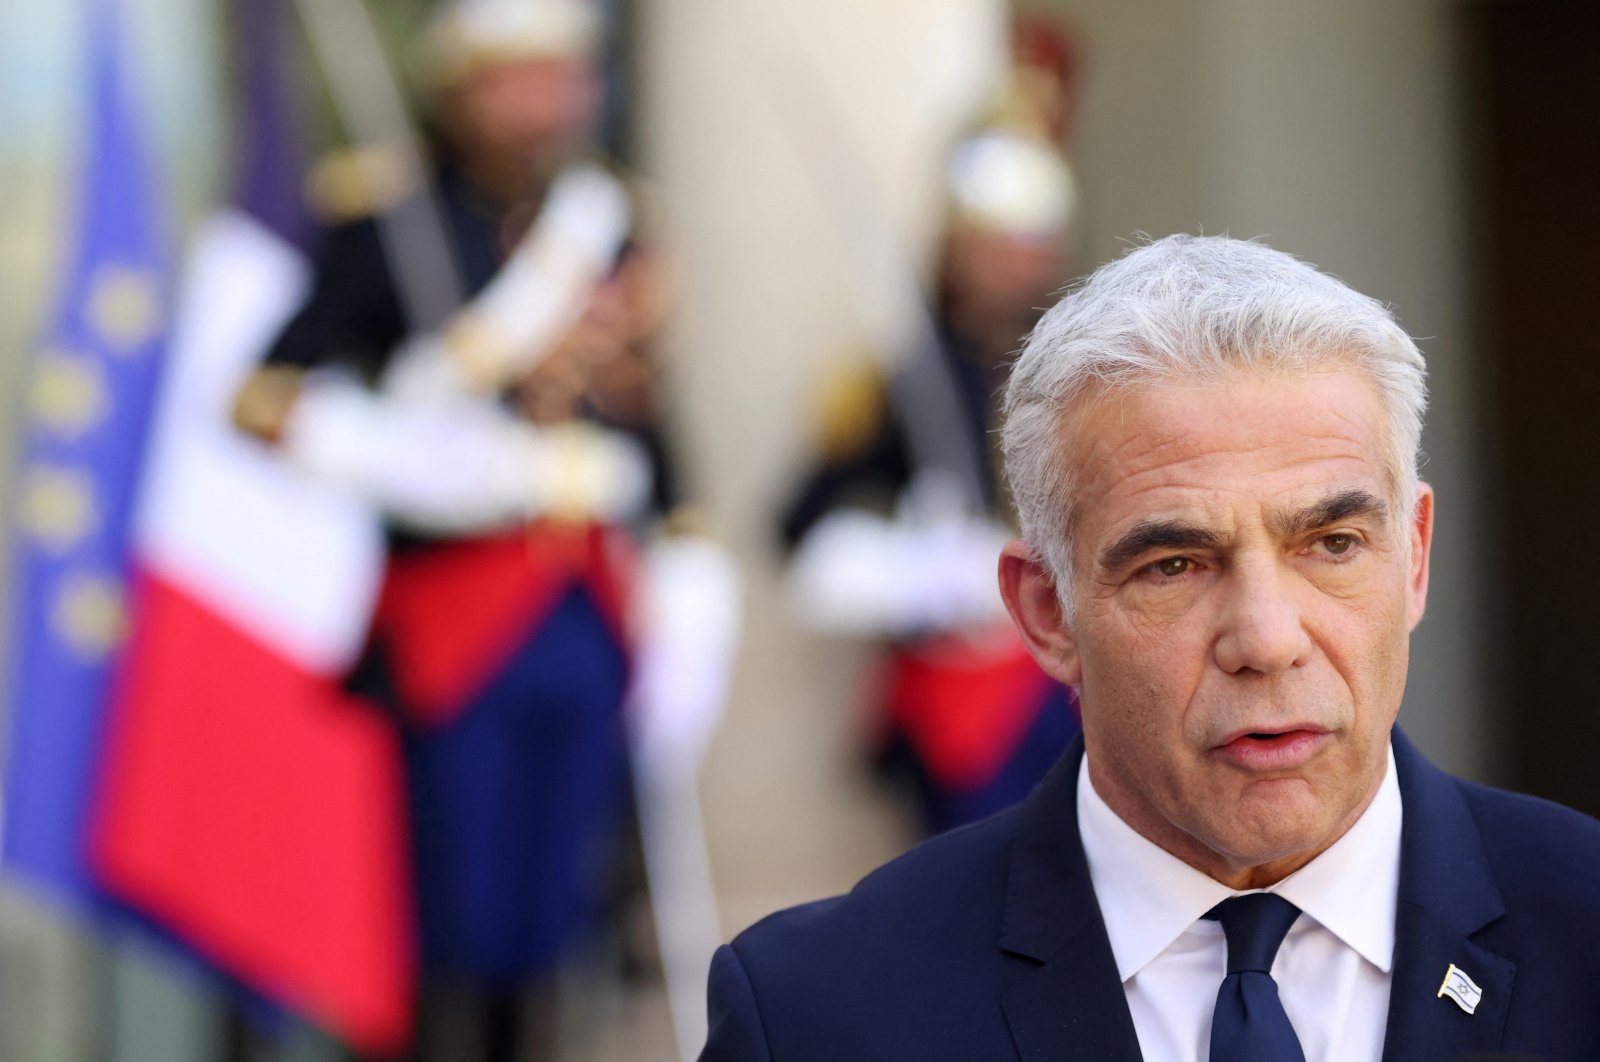 New Israeli Prime Minister Yair Lapid delivers a joint statement with French President Emmanuel Macron (not seen) before a meeting at the Elysee Palace in Paris, France, July 5, 2022. (Reuters Photo)